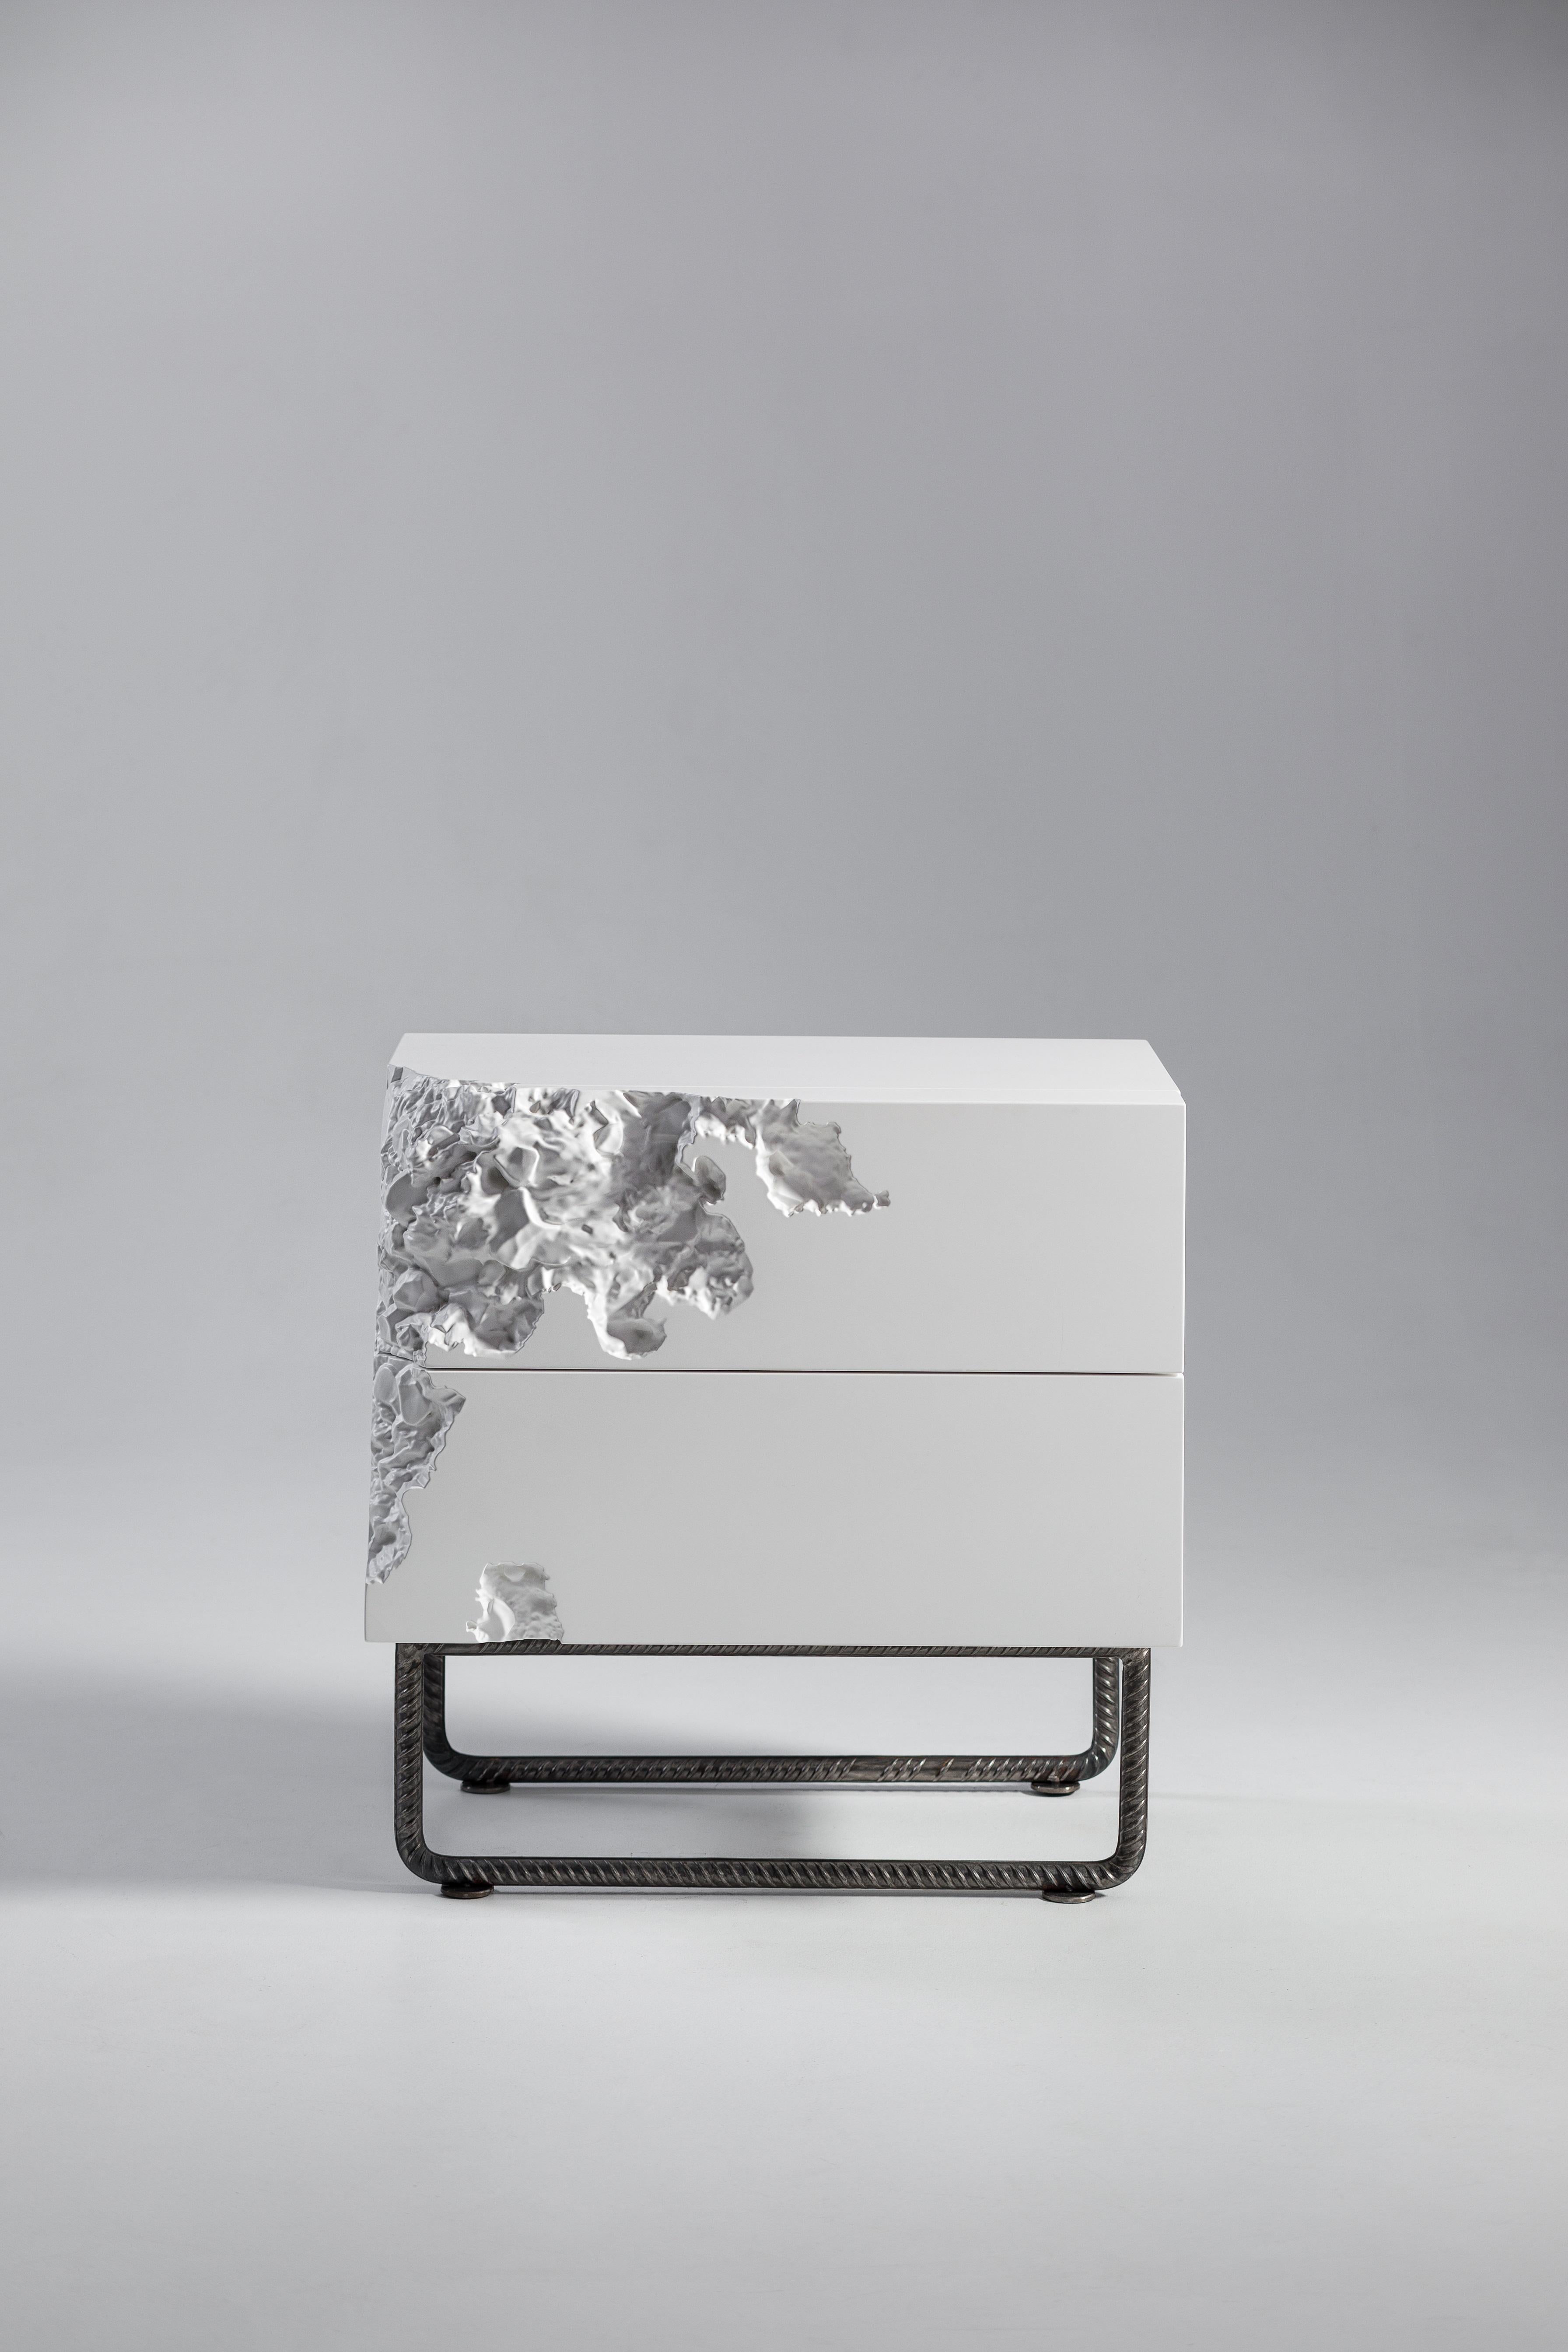 Facades of the bedside table are decorated with asymmetric milling patterns (they are not identical on the right and left curbstones). The game of contrasts of pure colors and 